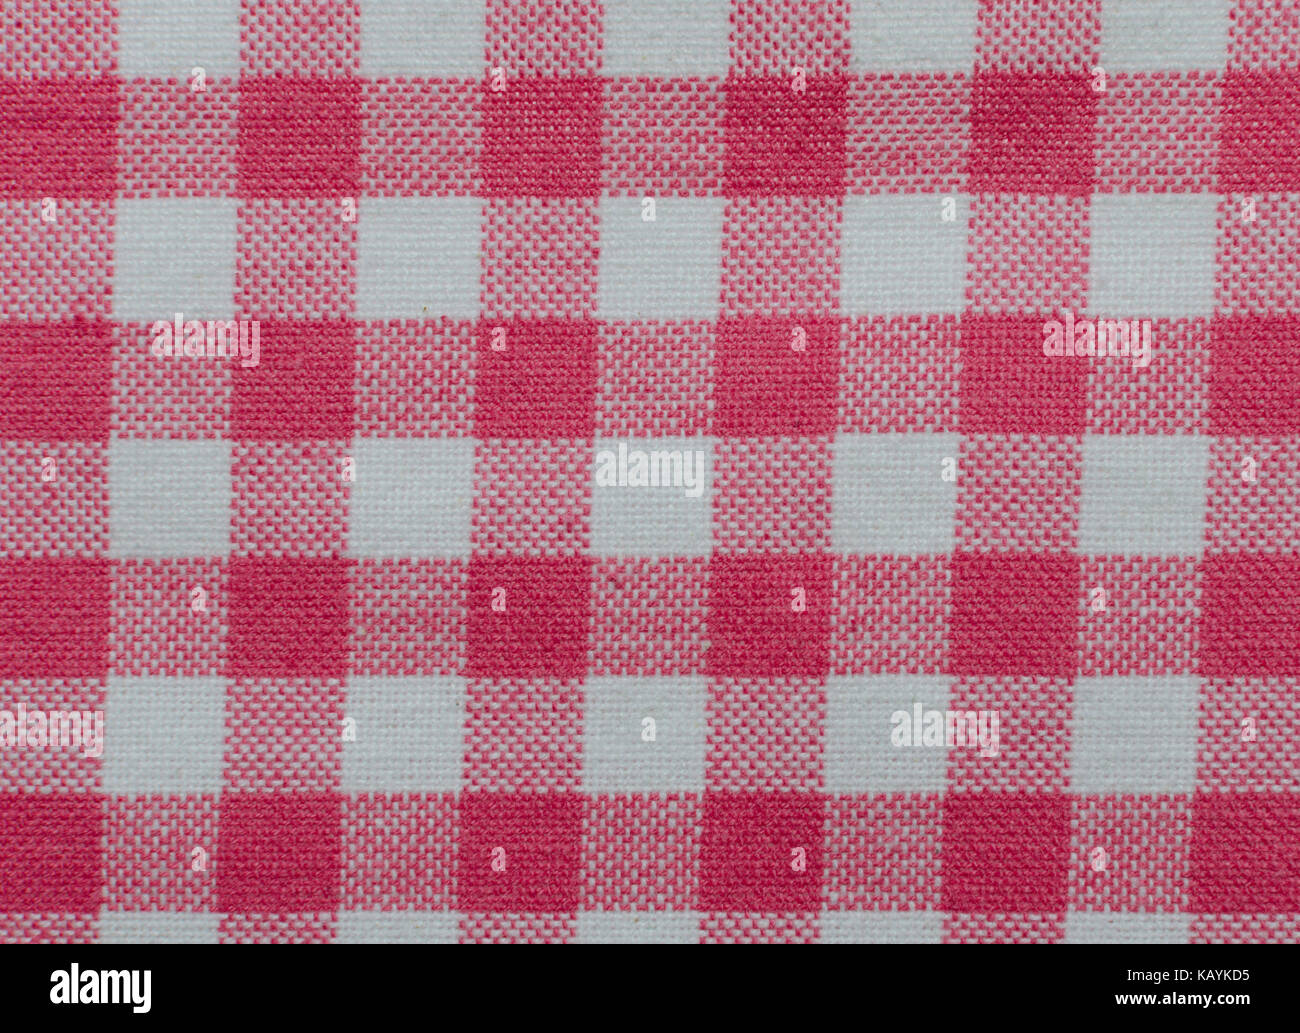 Material for a tea towel or table cloth with a checkered red and white  pattern Stock Photo - Alamy